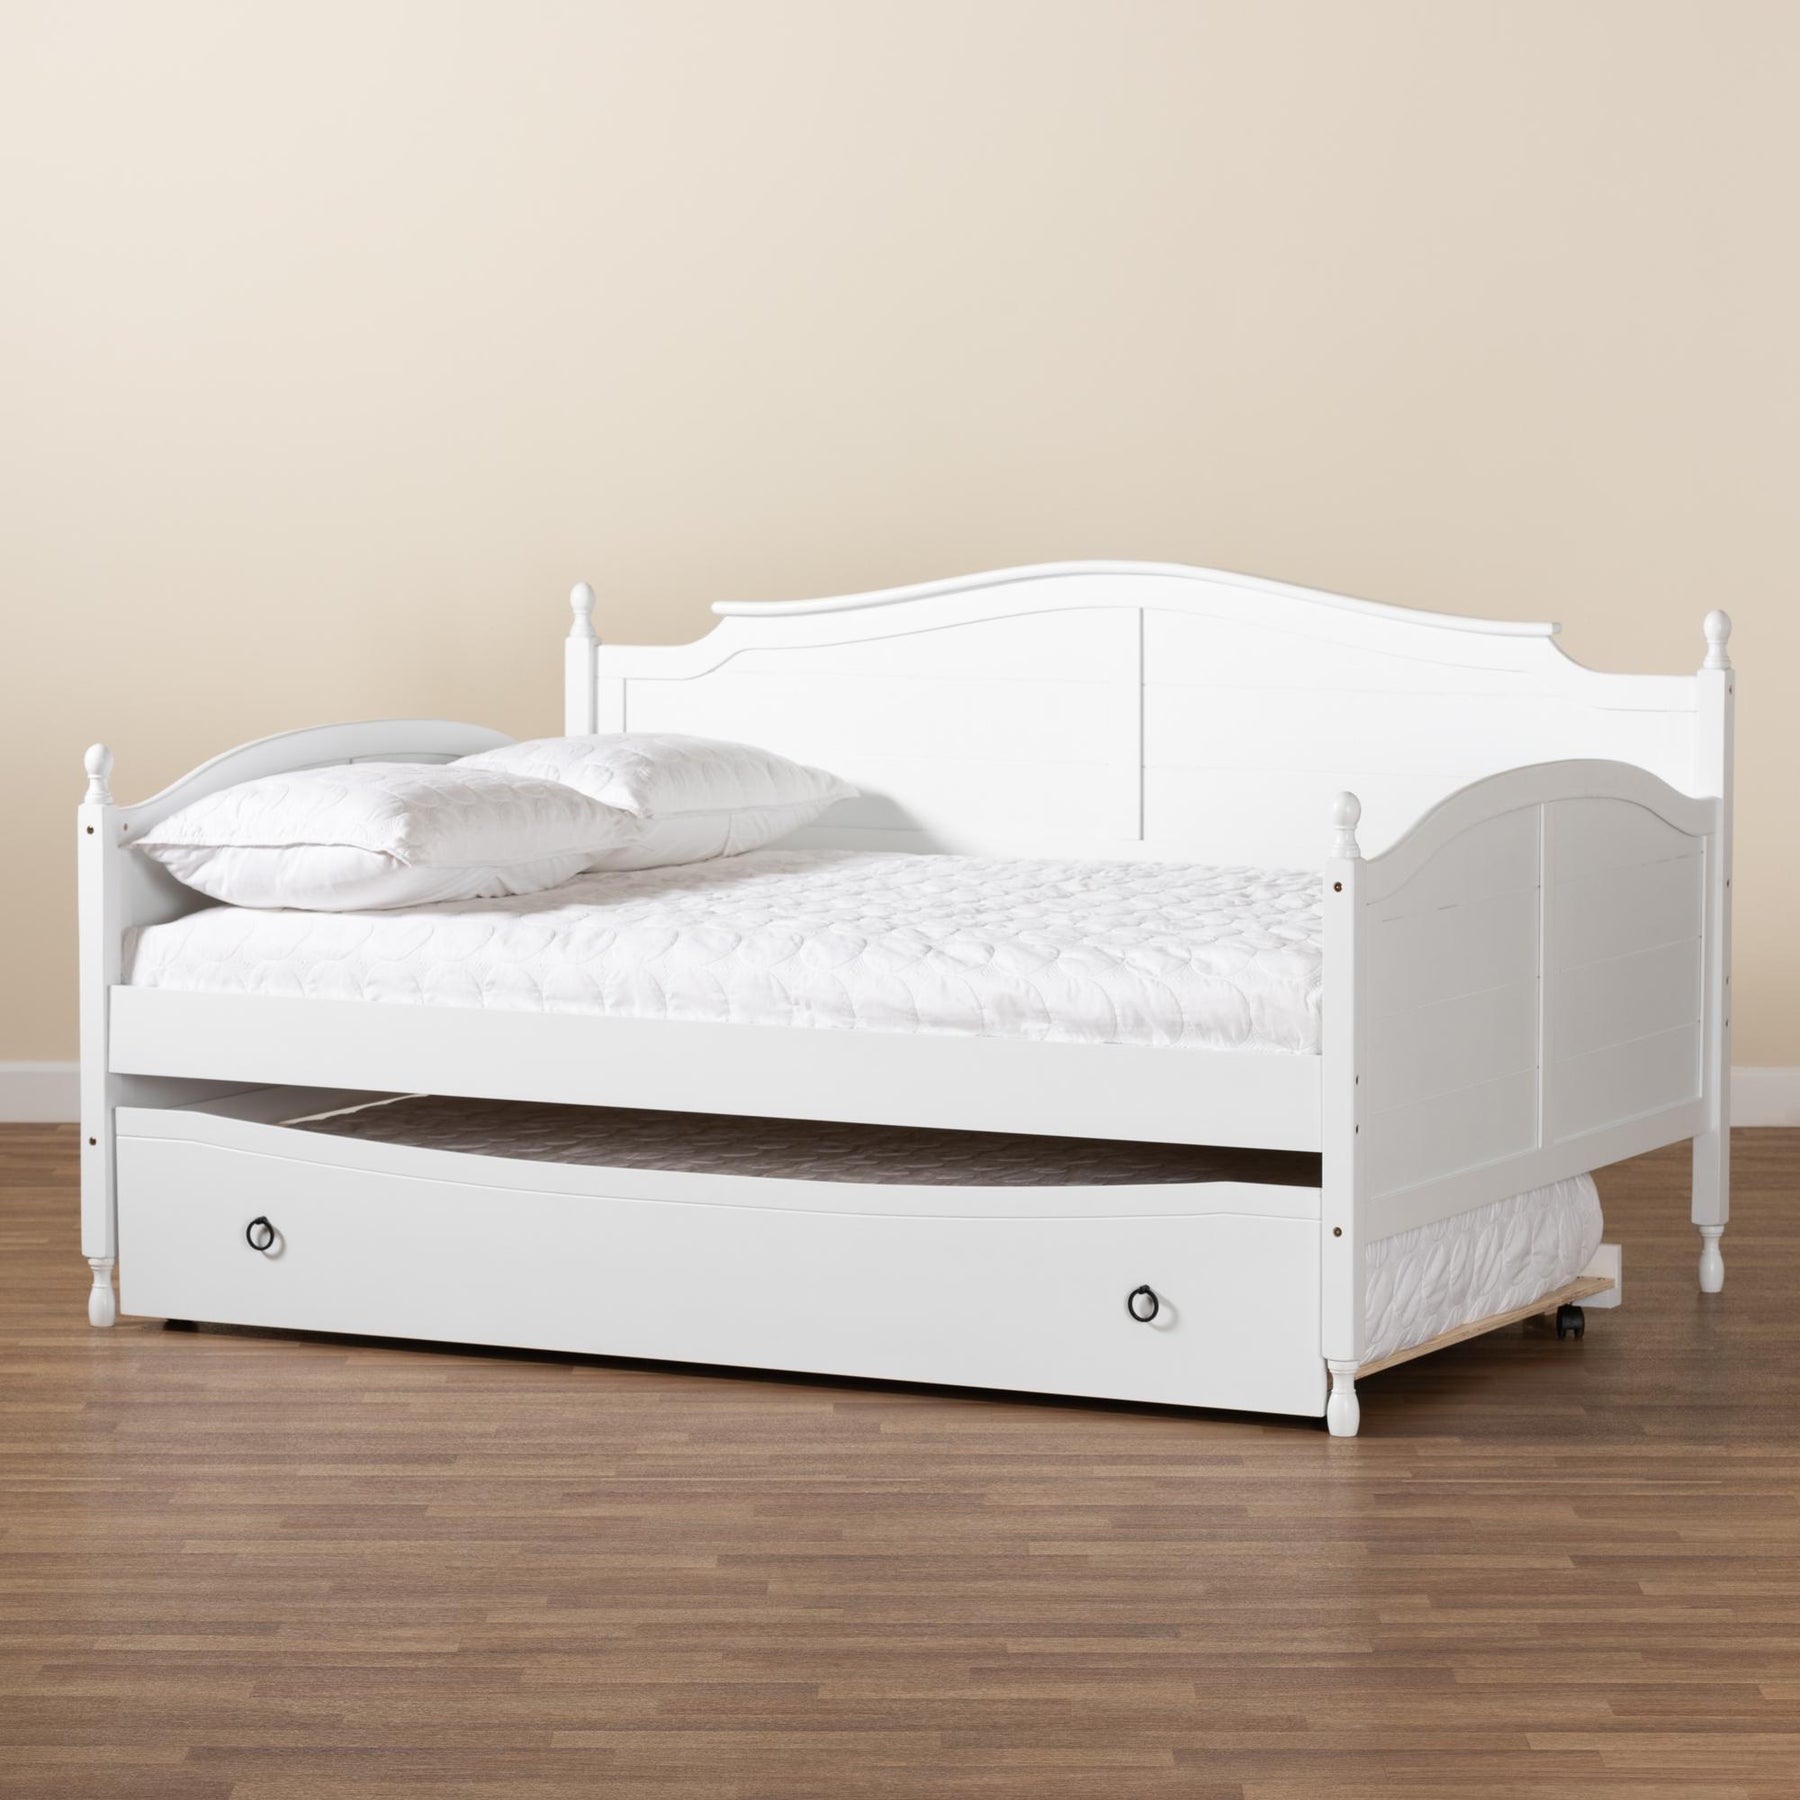 Baxton Studio Mara Cottage Farmhouse White Finished Wood Full Size Daybed With Roll-Out Trundle Bed - MG0030-White-Daybed-Full